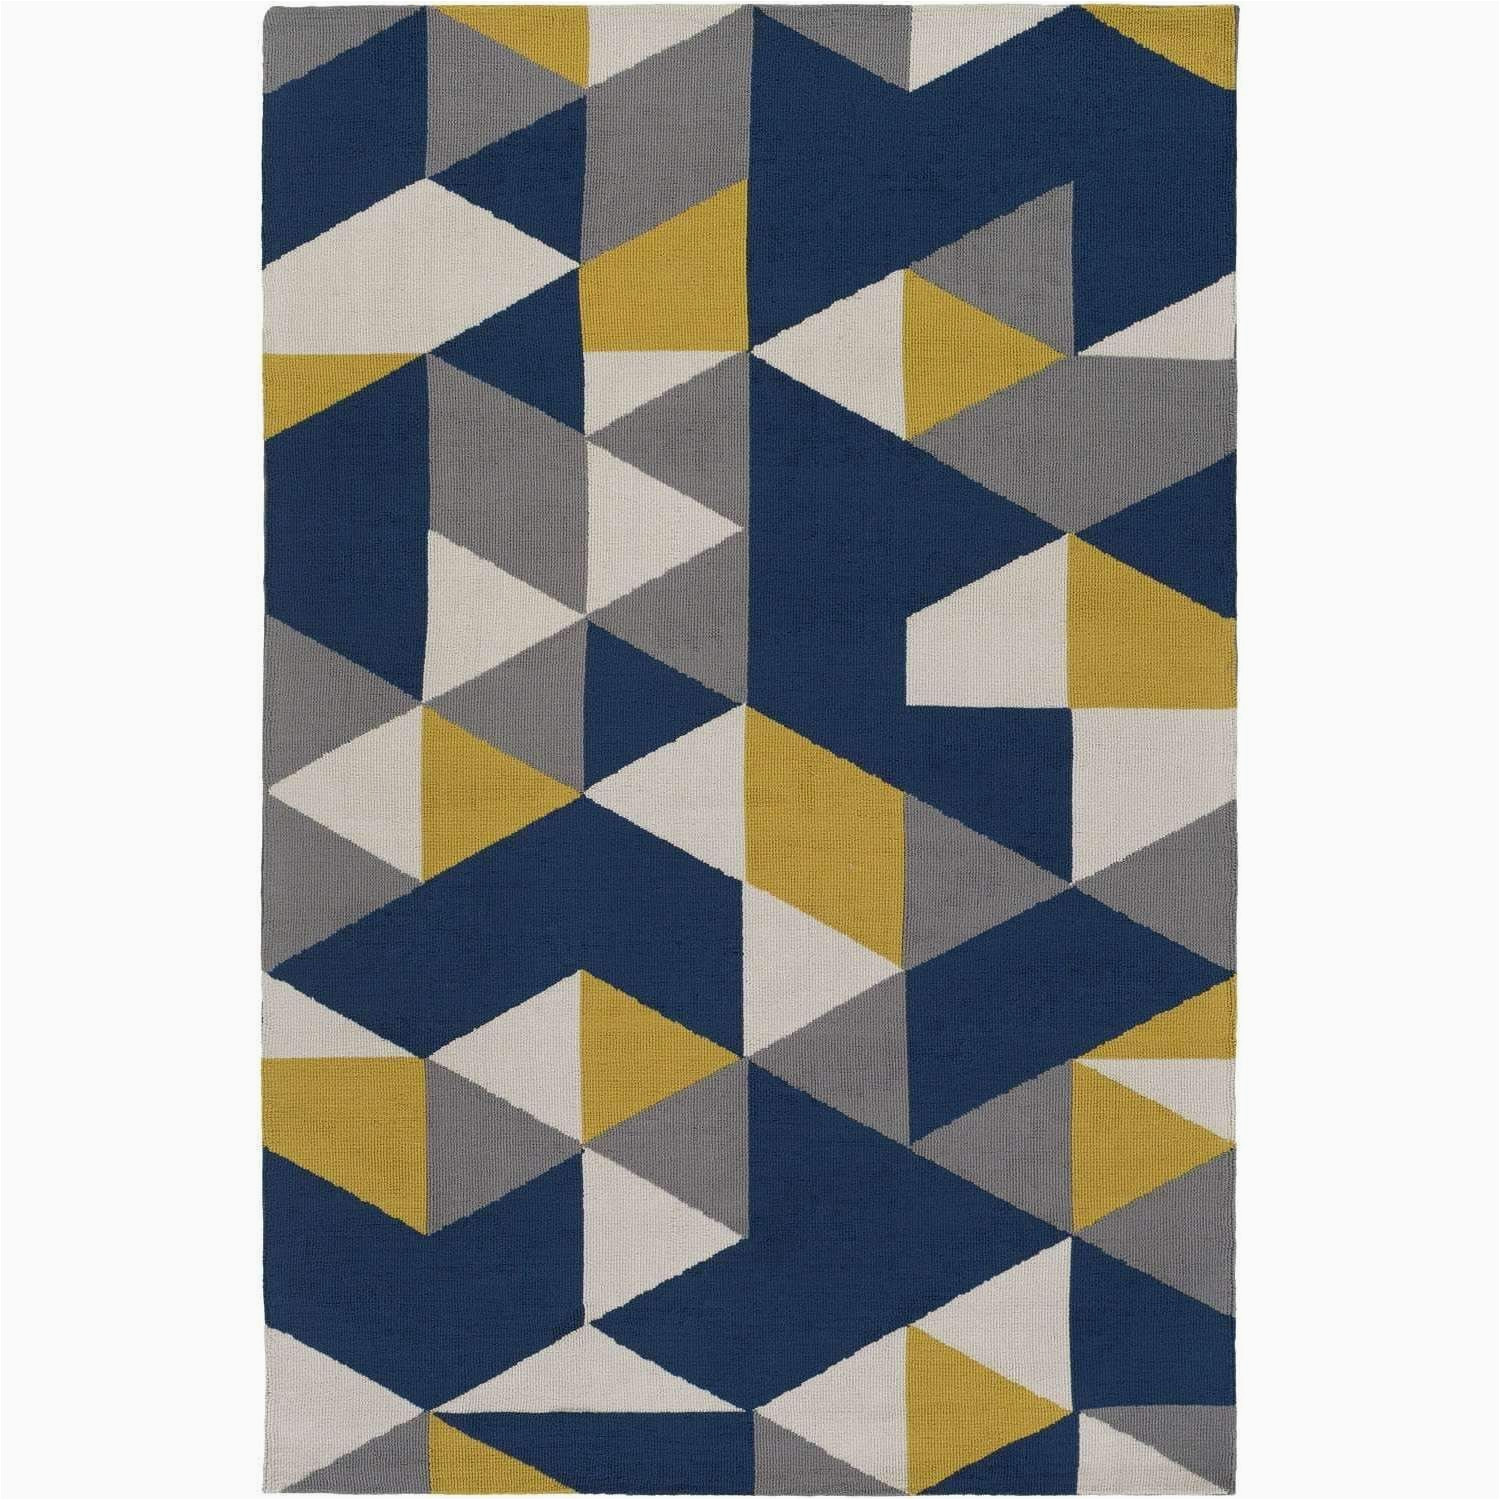 Blue Grey and Yellow Rug Joan Joan-6087 Navy Blue/yellow/gray Contemporary Rug In 2022 …